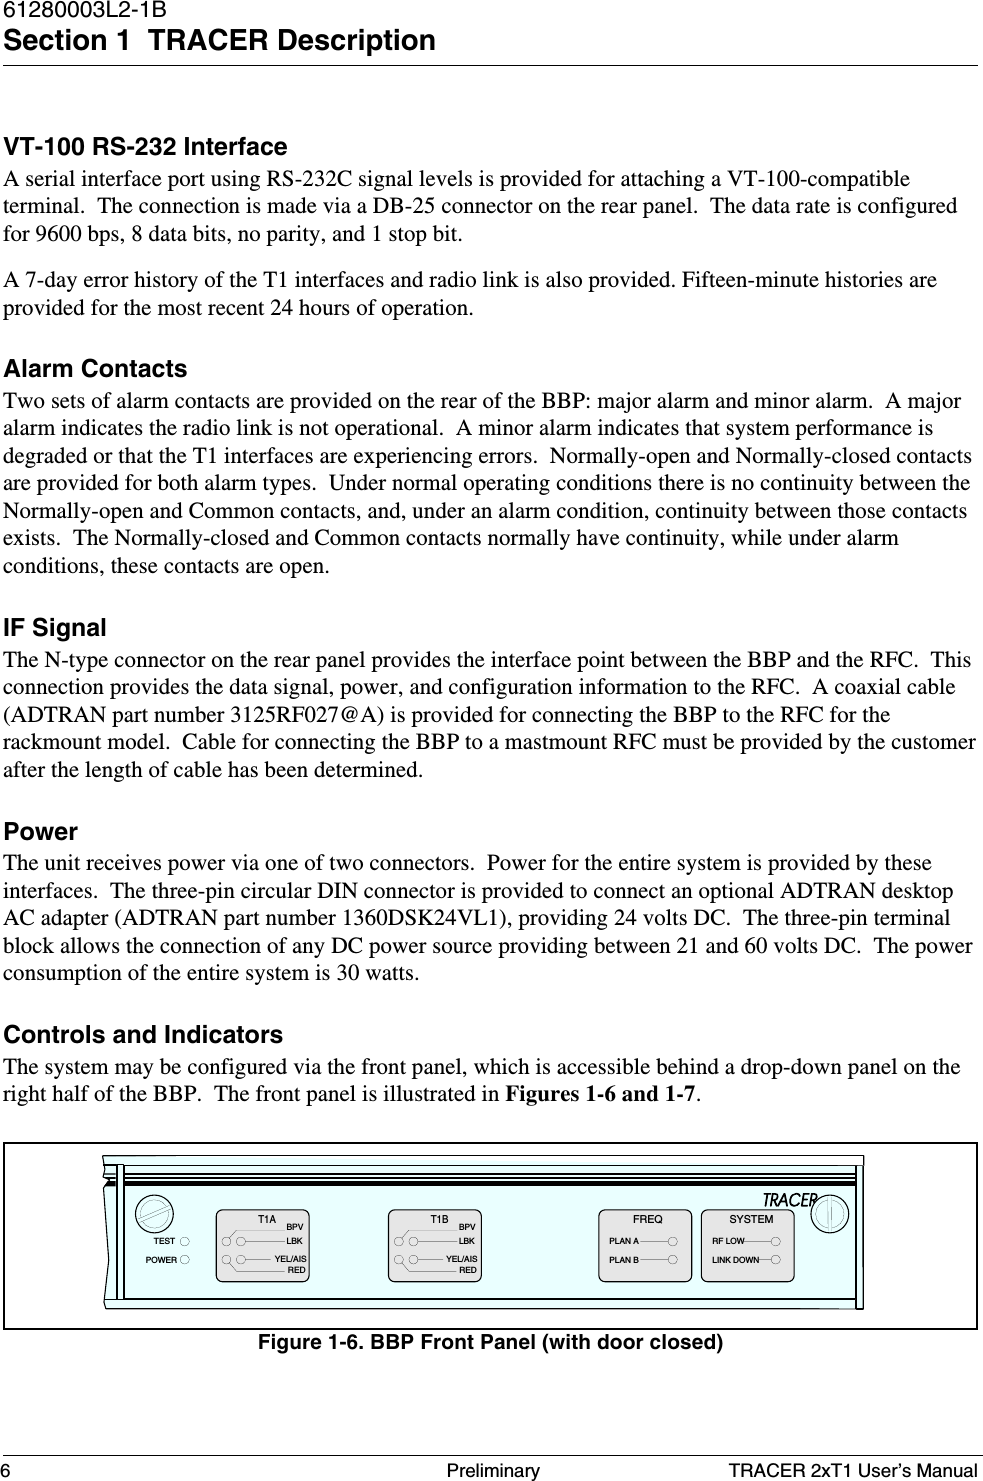 TRACER 2xT1 User’s Manual61280003L2-1BSection 1  TRACER Description6 PreliminaryVT-100 RS-232 InterfaceA serial interface port using RS-232C signal levels is provided for attaching a VT-100-compatibleterminal.  The connection is made via a DB-25 connector on the rear panel.  The data rate is configuredfor 9600 bps, 8 data bits, no parity, and 1 stop bit.A 7-day error history of the T1 interfaces and radio link is also provided. Fifteen-minute histories areprovided for the most recent 24 hours of operation.Alarm ContactsTwo sets of alarm contacts are provided on the rear of the BBP: major alarm and minor alarm.  A majoralarm indicates the radio link is not operational.  A minor alarm indicates that system performance isdegraded or that the T1 interfaces are experiencing errors.  Normally-open and Normally-closed contactsare provided for both alarm types.  Under normal operating conditions there is no continuity between theNormally-open and Common contacts, and, under an alarm condition, continuity between those contactsexists.  The Normally-closed and Common contacts normally have continuity, while under alarmconditions, these contacts are open.IF SignalThe N-type connector on the rear panel provides the interface point between the BBP and the RFC.  Thisconnection provides the data signal, power, and configuration information to the RFC.  A coaxial cable(ADTRAN part number 3125RF027@A) is provided for connecting the BBP to the RFC for therackmount model.  Cable for connecting the BBP to a mastmount RFC must be provided by the customerafter the length of cable has been determined.PowerThe unit receives power via one of two connectors.  Power for the entire system is provided by theseinterfaces.  The three-pin circular DIN connector is provided to connect an optional ADTRAN desktopAC adapter (ADTRAN part number 1360DSK24VL1), providing 24 volts DC.  The three-pin terminalblock allows the connection of any DC power source providing between 21 and 60 volts DC.  The powerconsumption of the entire system is 30 watts.Controls and IndicatorsThe system may be configured via the front panel, which is accessible behind a drop-down panel on theright half of the BBP.  The front panel is illustrated in Figures 1-6 and 1-7.Figure 1-6. BBP Front Panel (with door closed)BPVT1ALBKBPVT1BLBKYEL/AISREDYEL/AISREDFREQPLAN APLAN BTESTPOWERRF LOWLINK DOWNSYSTEM